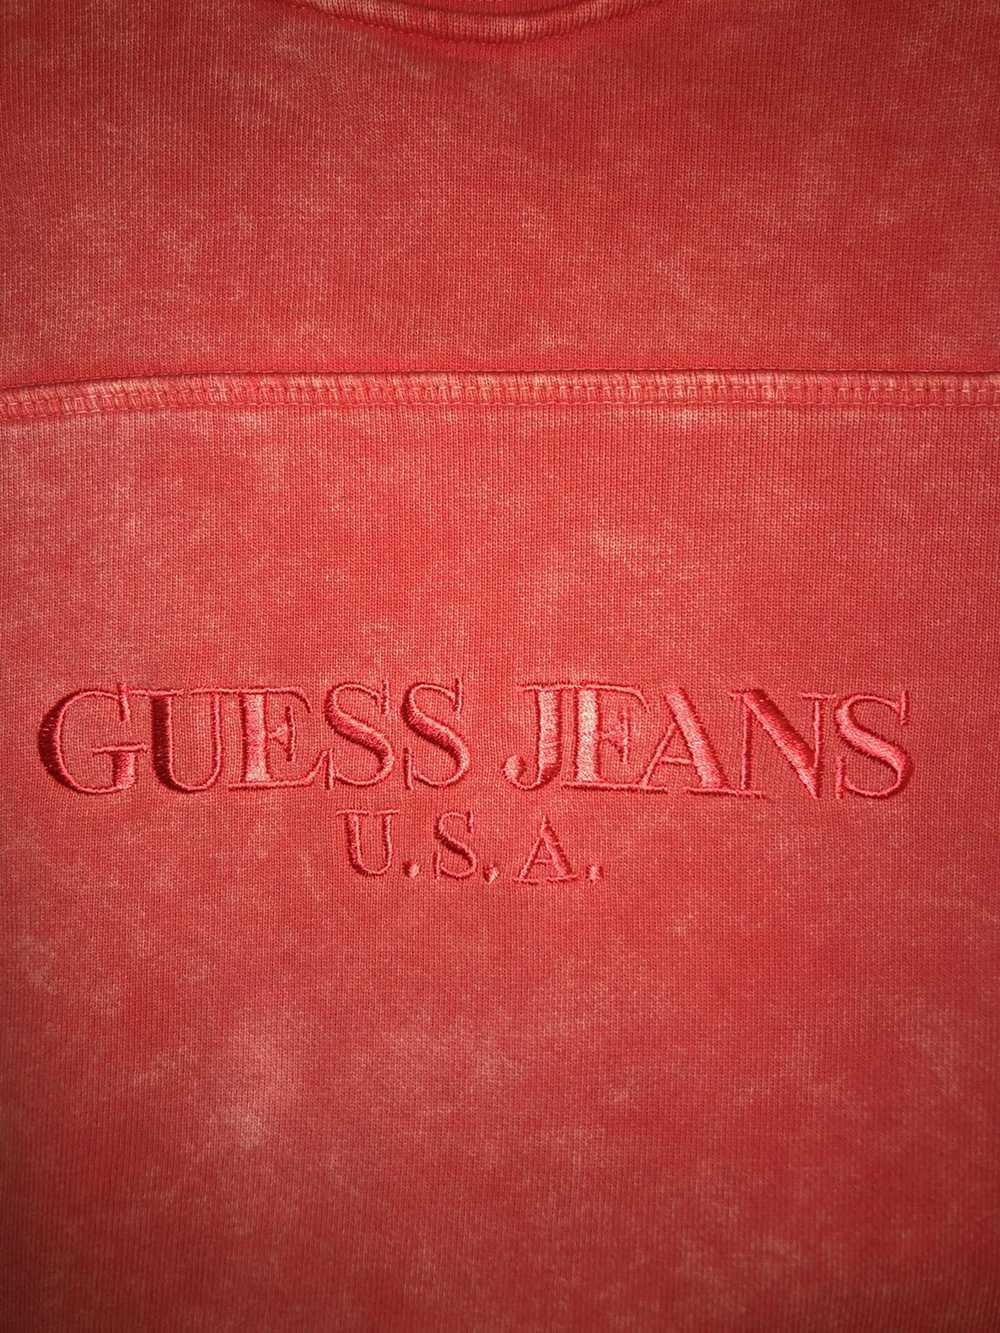 Guess Guess x Sean Wotherspoon - image 2